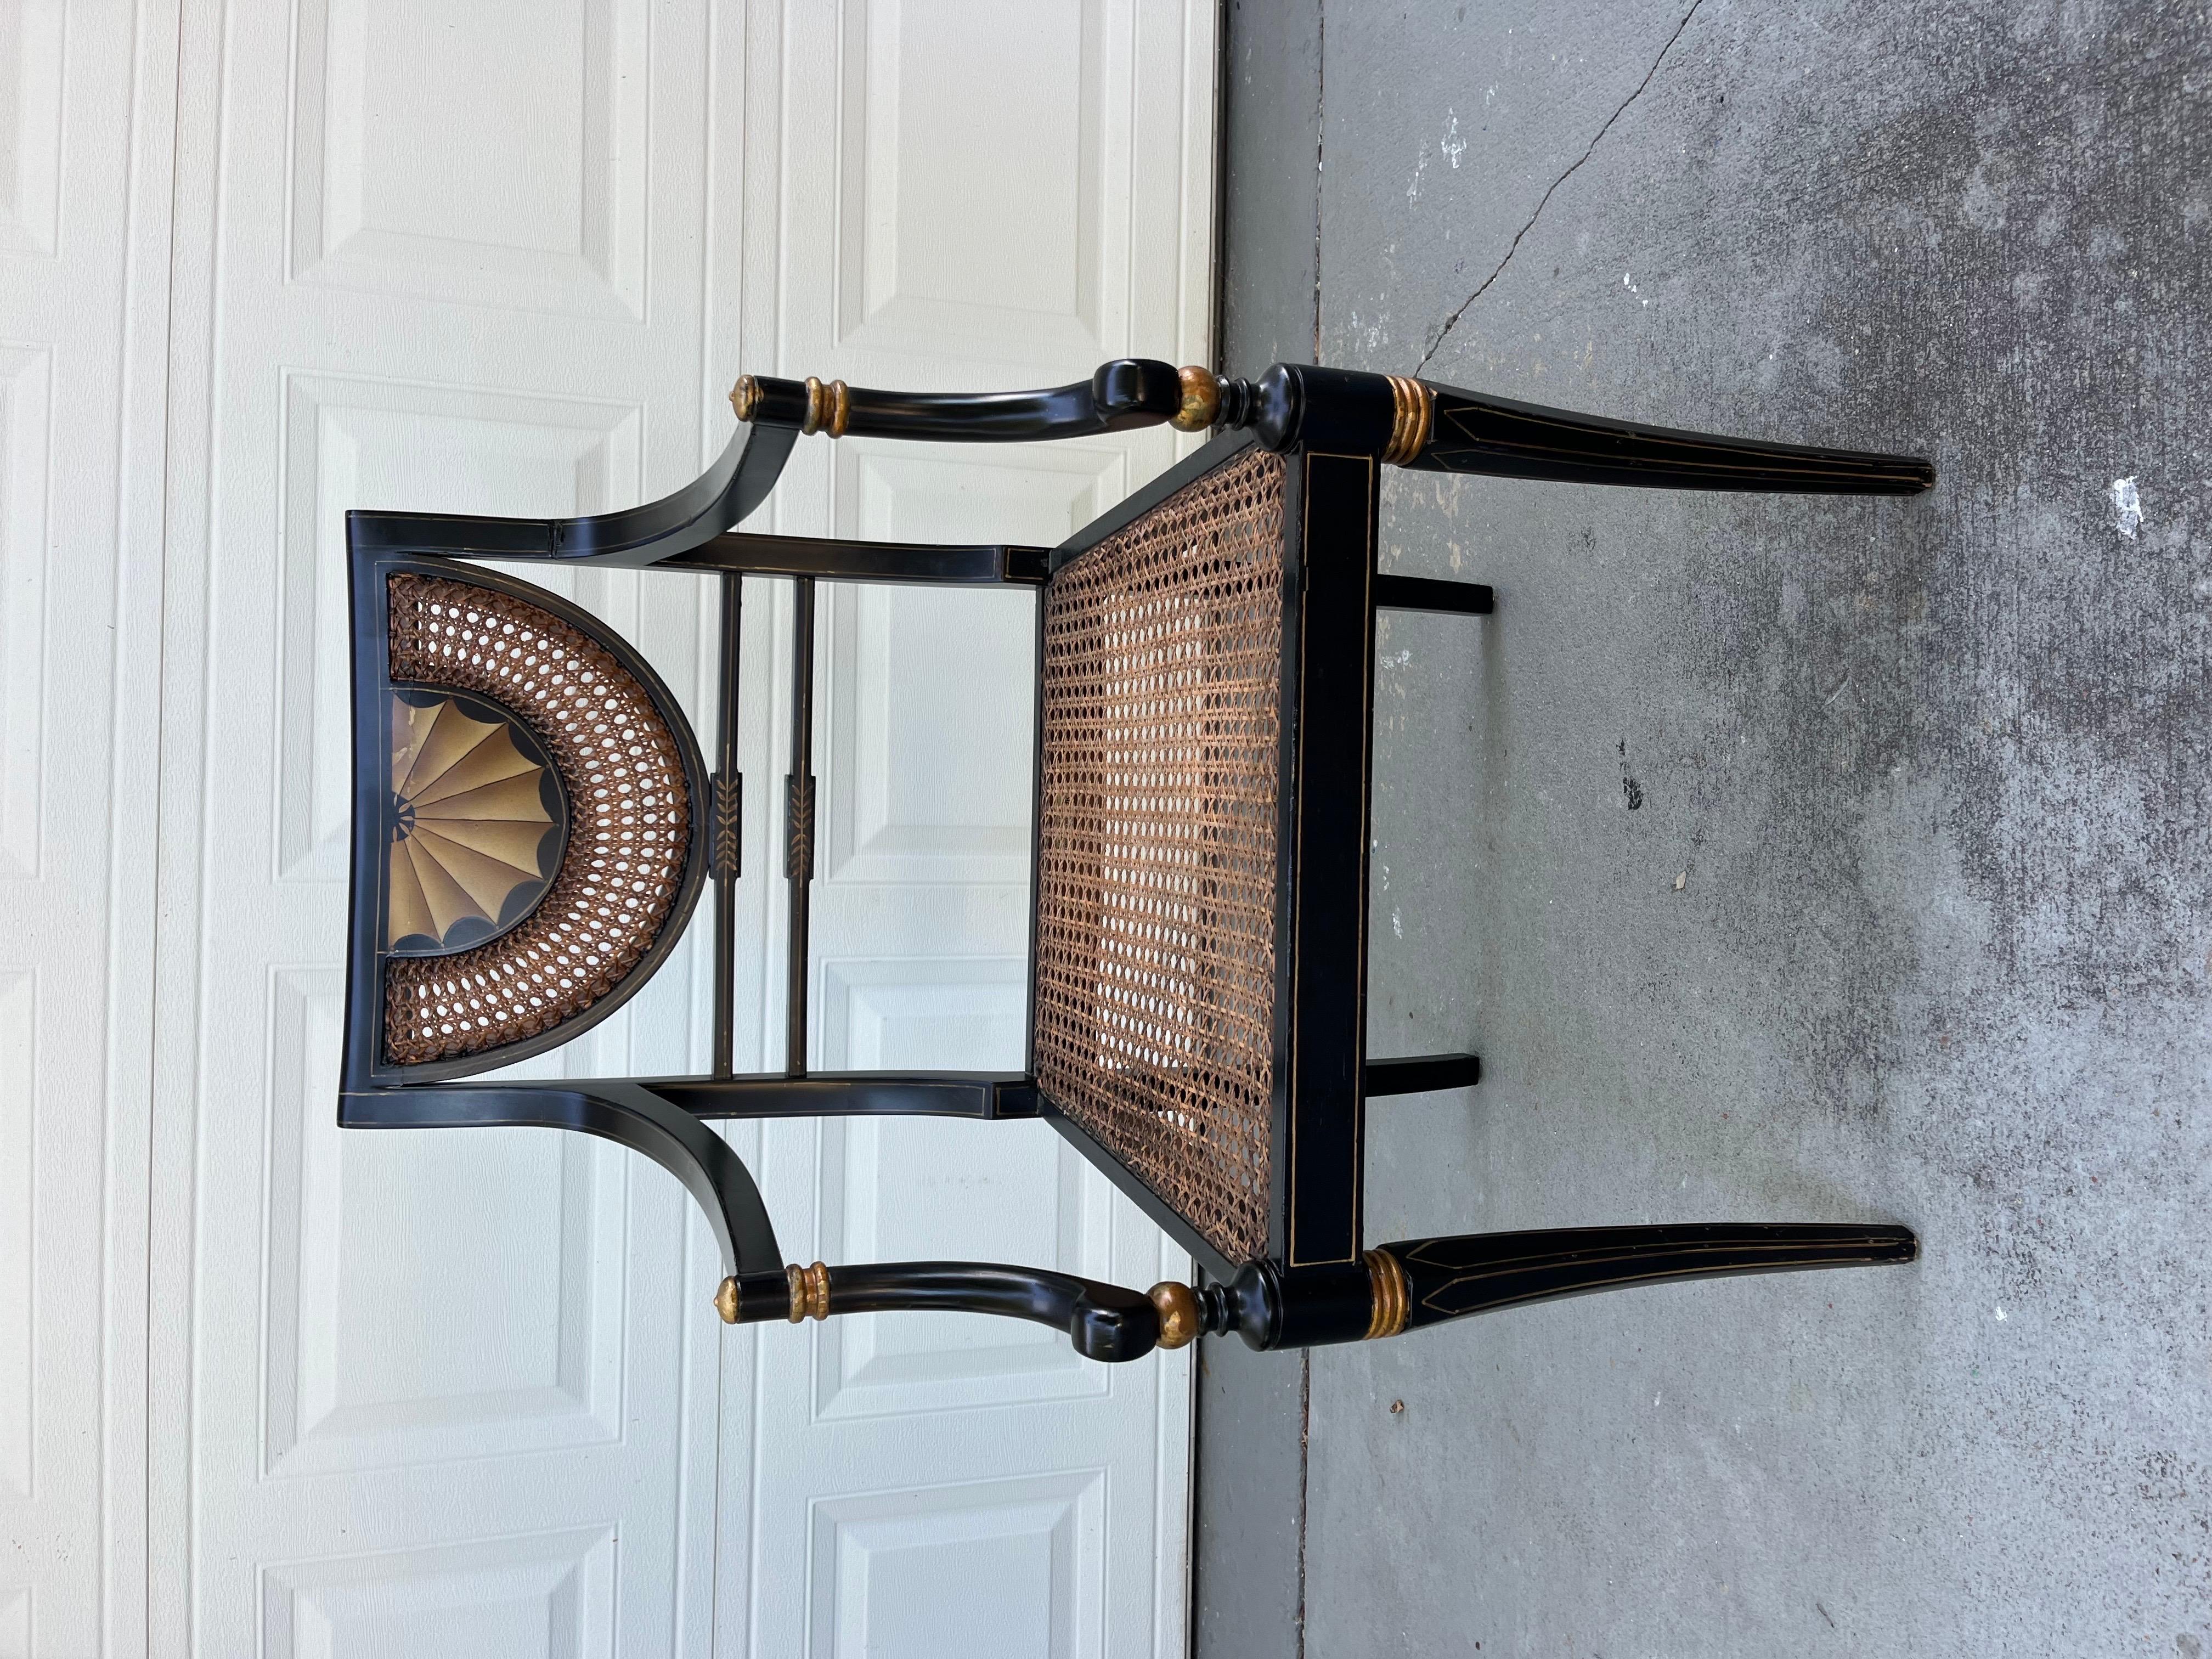 Vintage Regency Style Ebonized Armchair with Cane Seat

20th century Regency style armchair from the cabinet maker Trouvailles, Watertown Massachusetts. It is black lacquered with gold painted accents. Seat and back are caned and decorated with hand